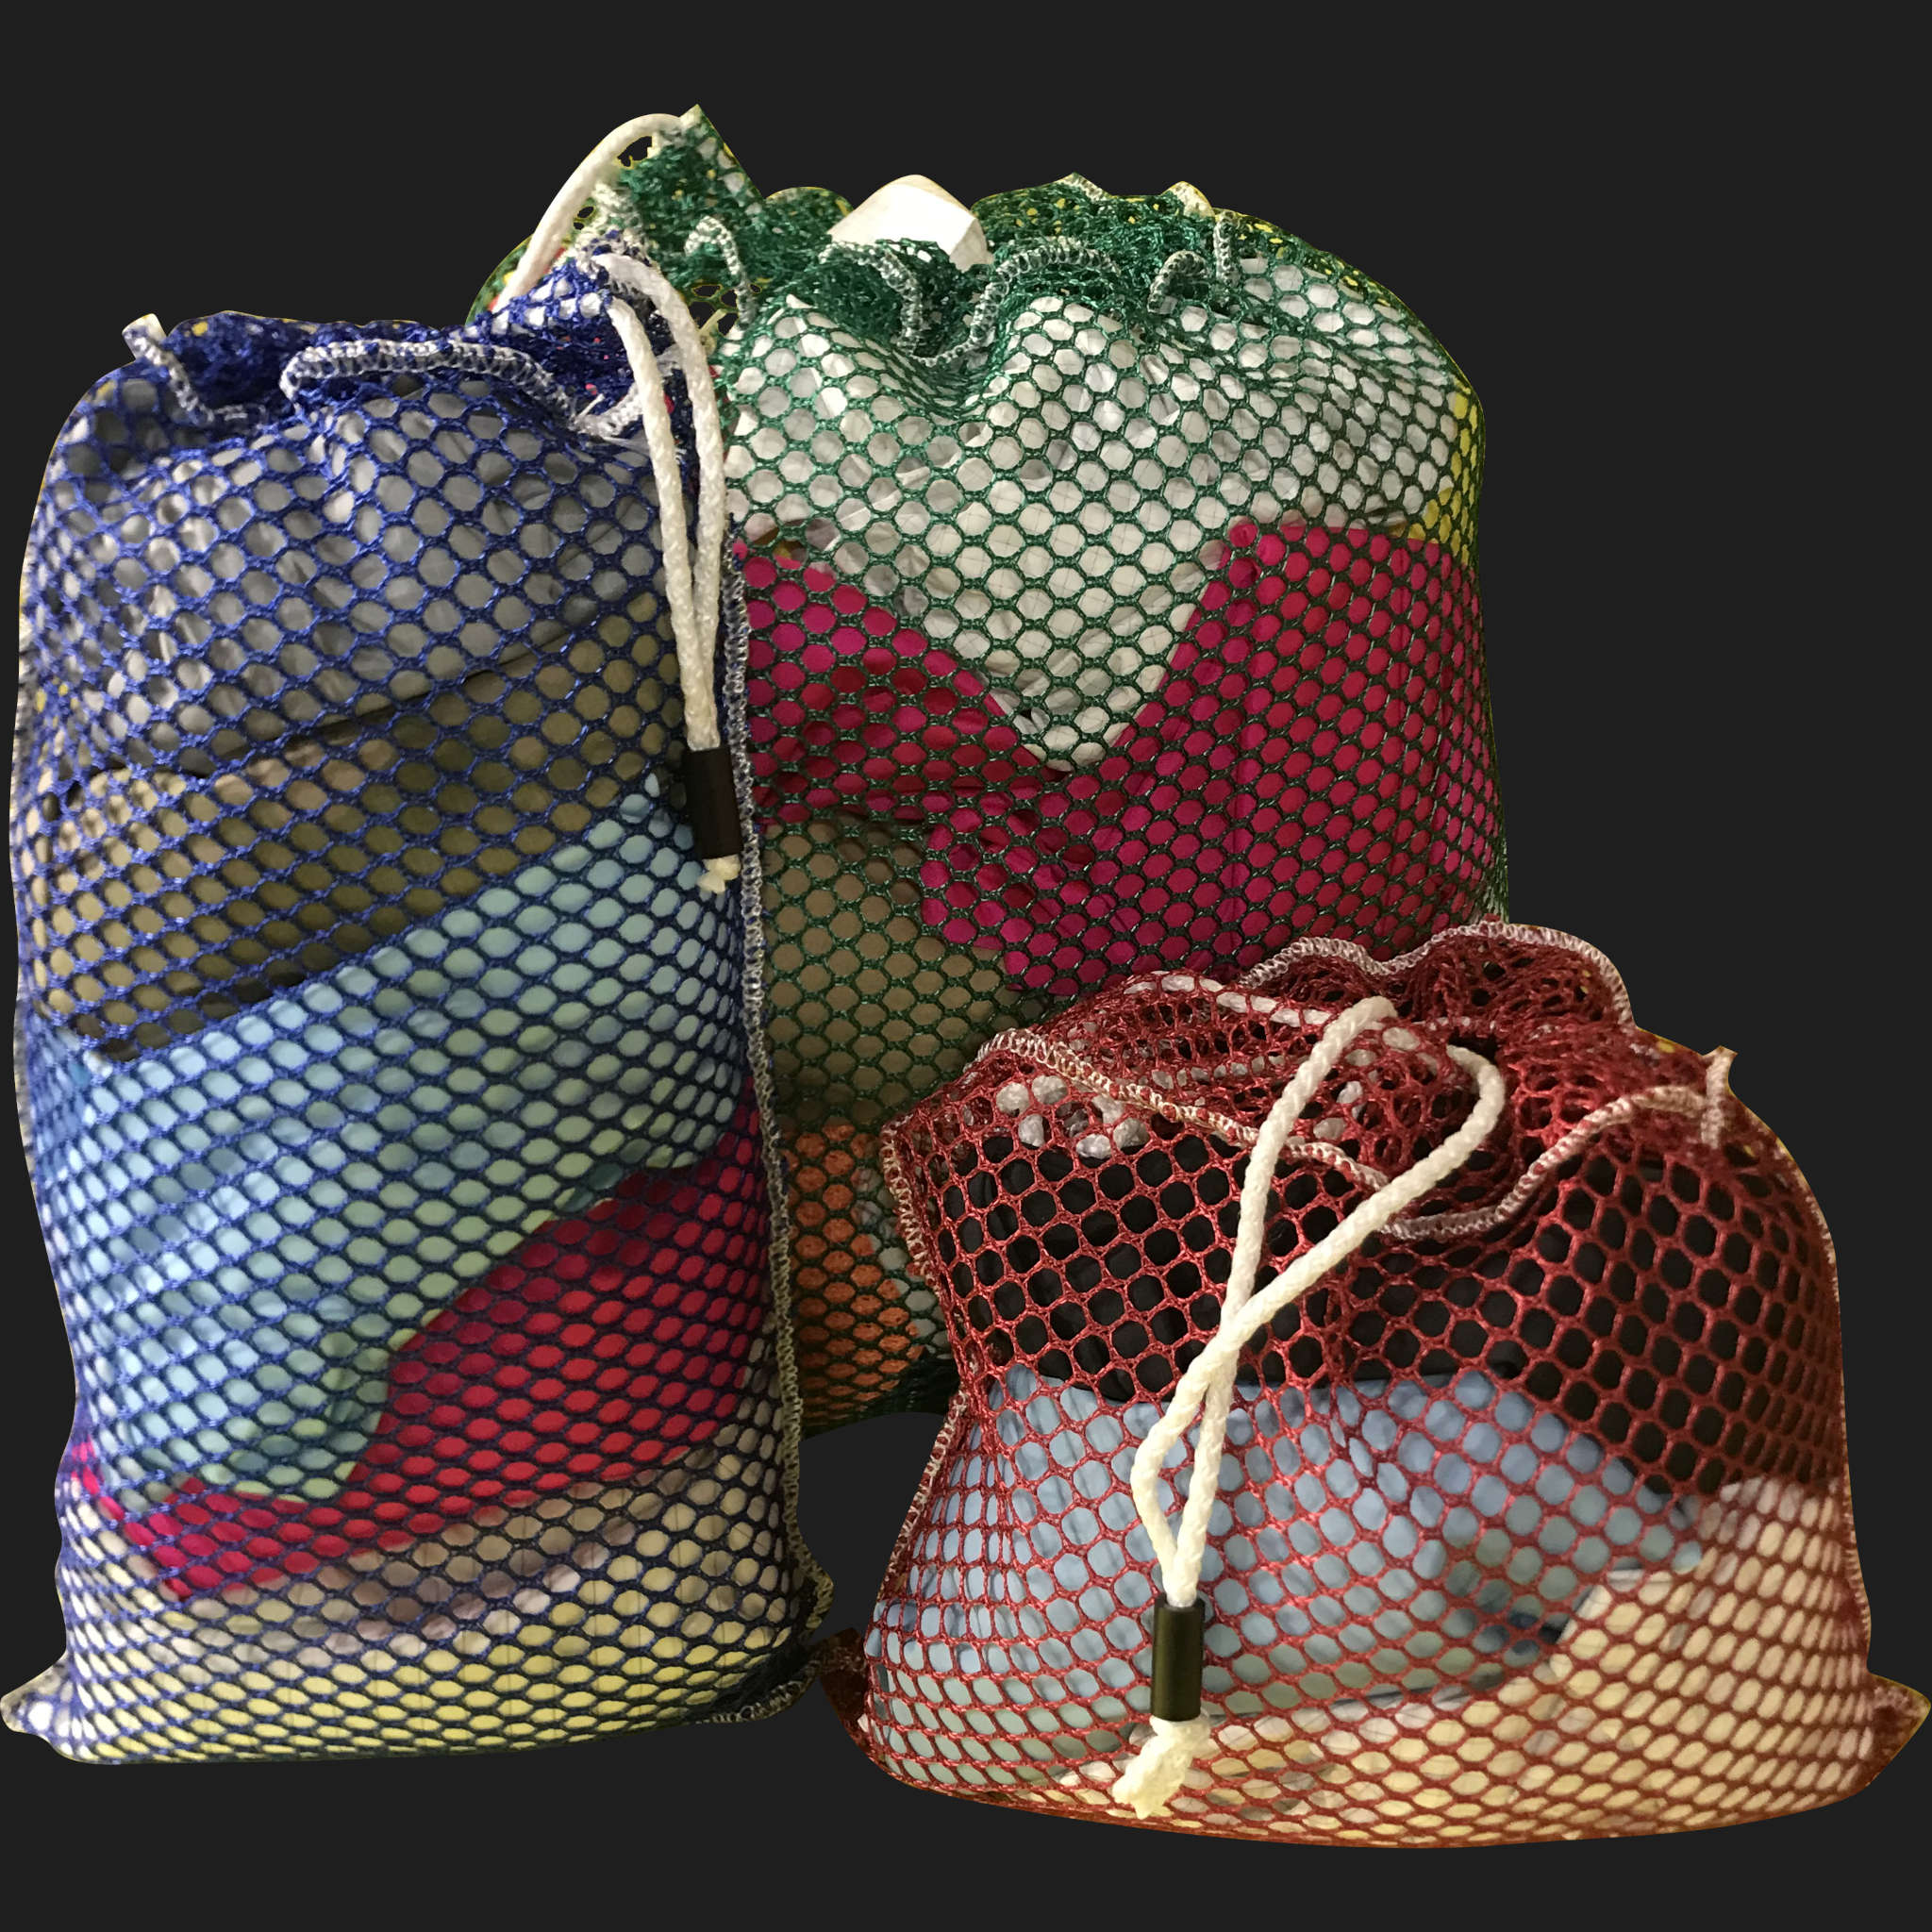 24" x 38" Customized Mesh-Net-Laundry Bags Heavy Duty with Cord and barrellock closure